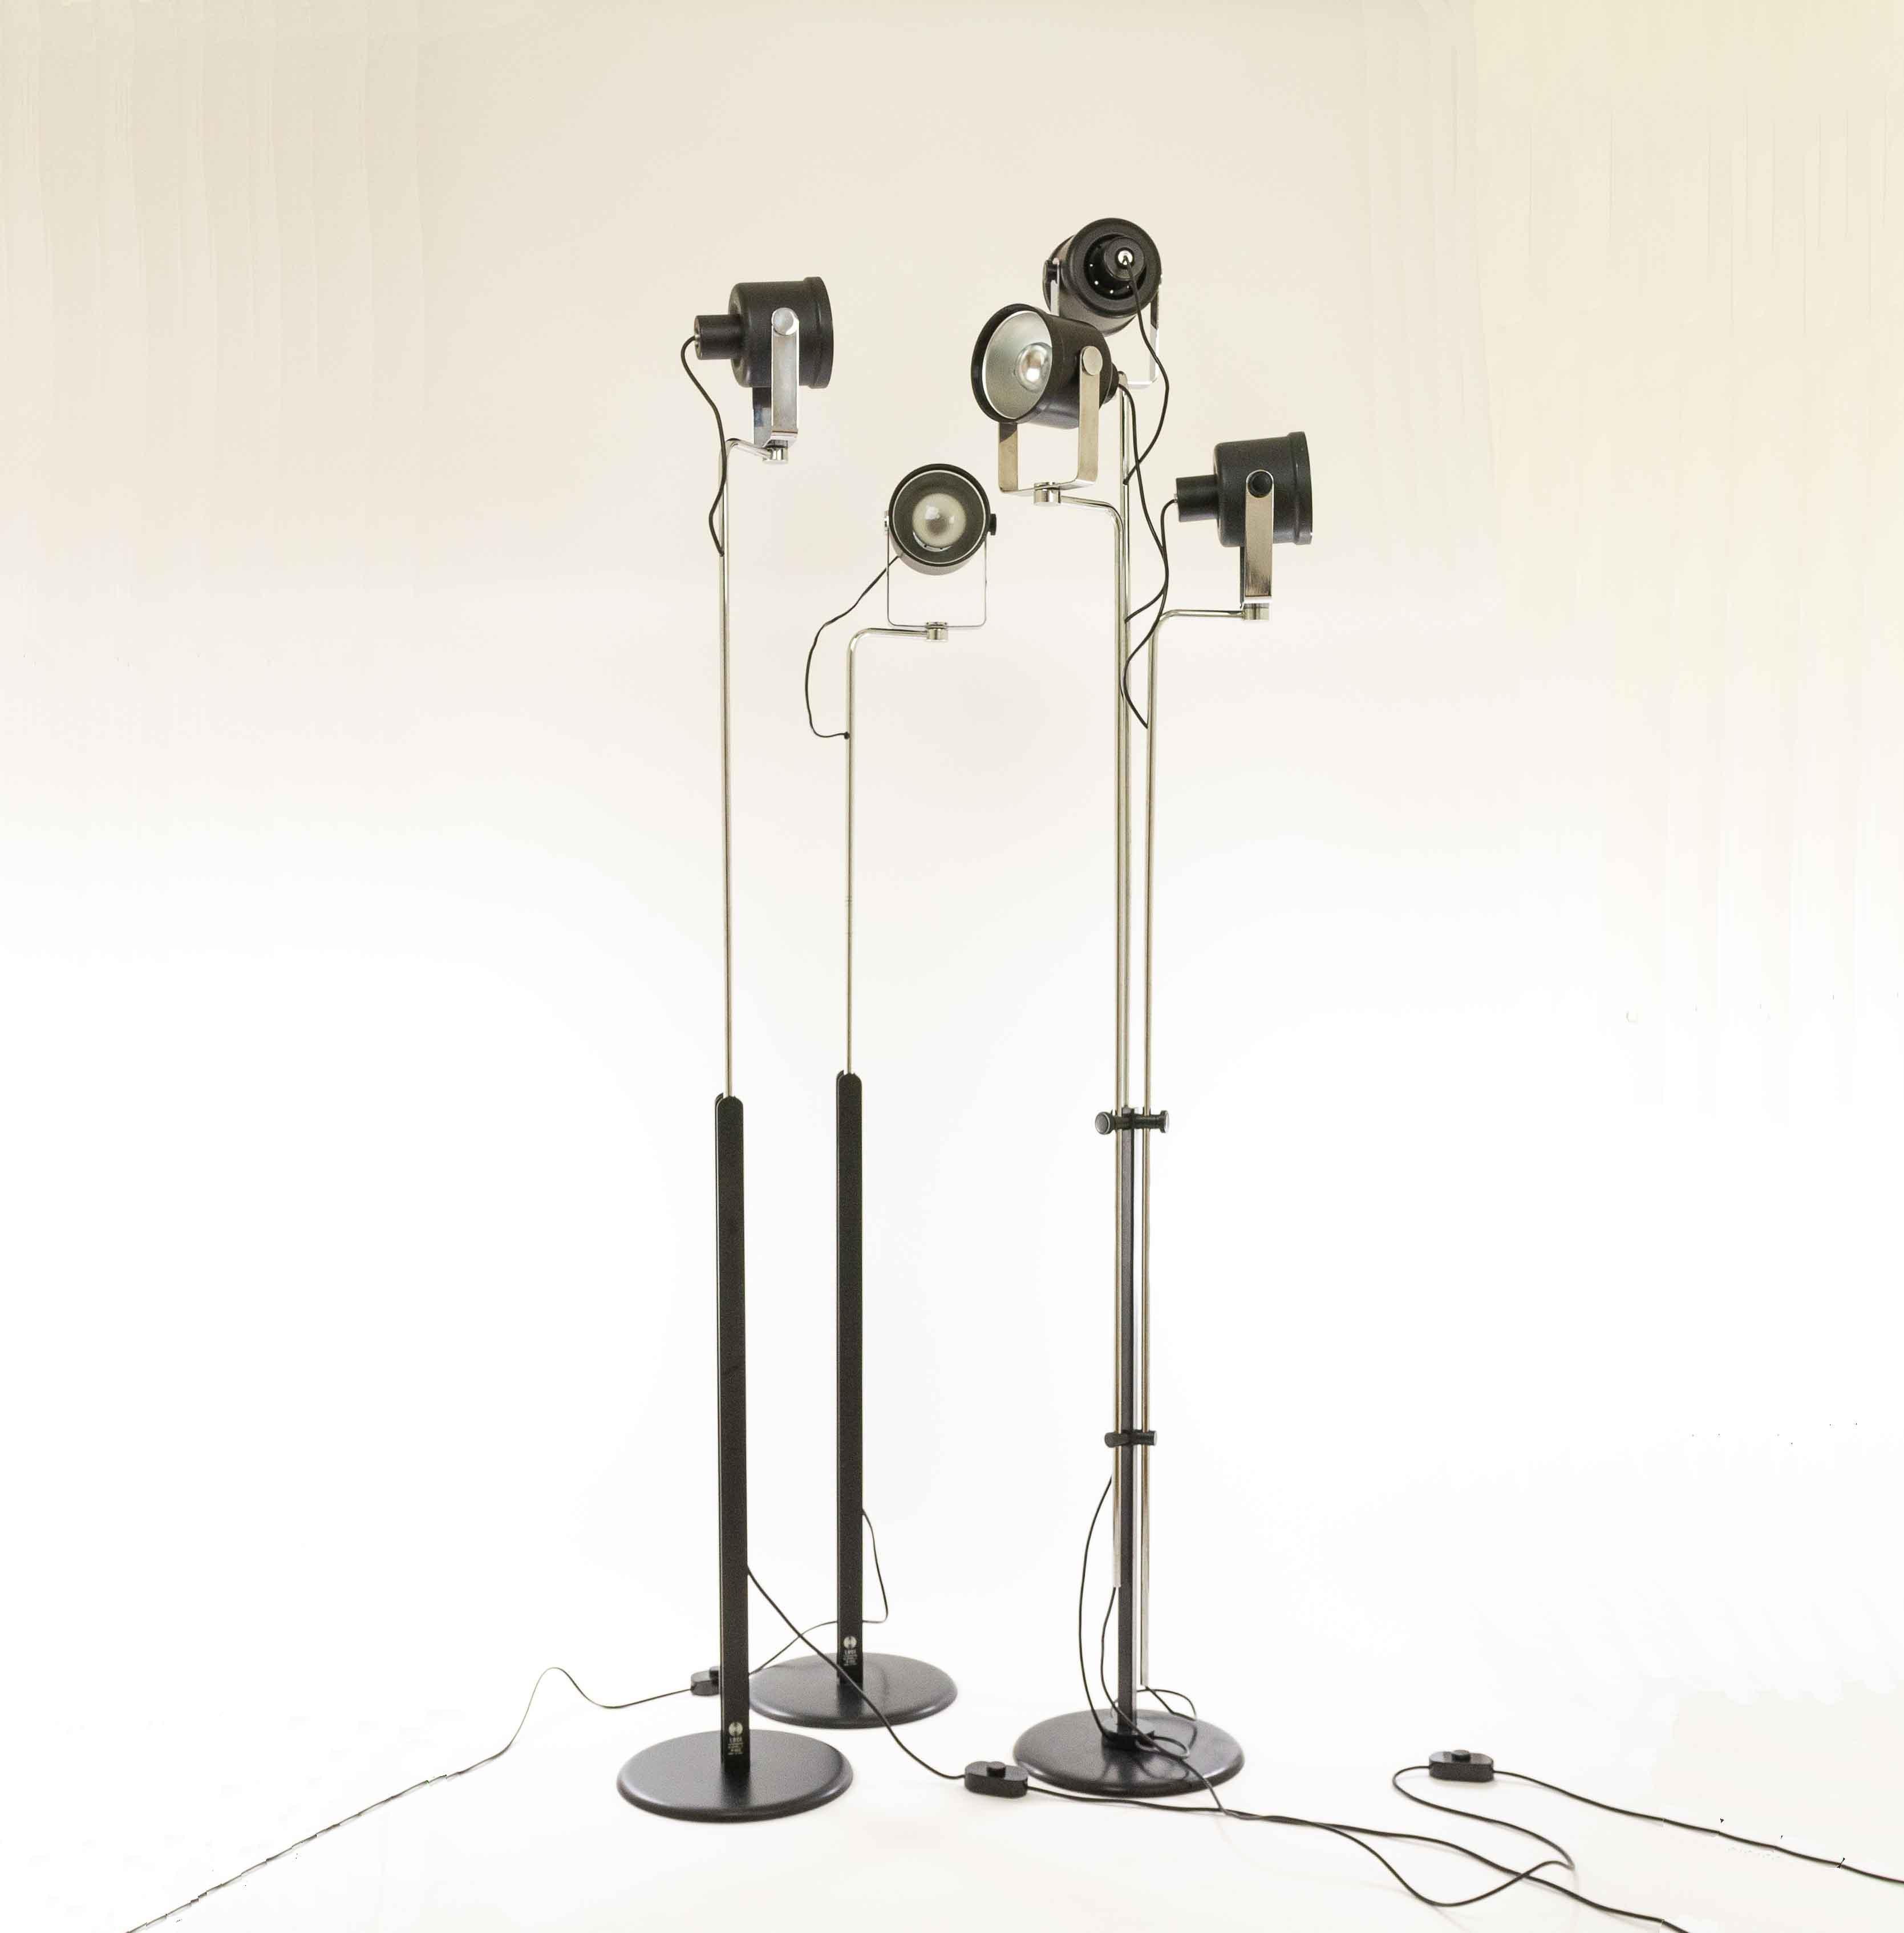 Unique set consisting of three different, but matching and rare floor lamps designed by Pio Luigi Brusasco and Giovanni Torretta for Luci illuminazione, Italy in 1970. The lamps are from the early more luxurious series; the name of the model is